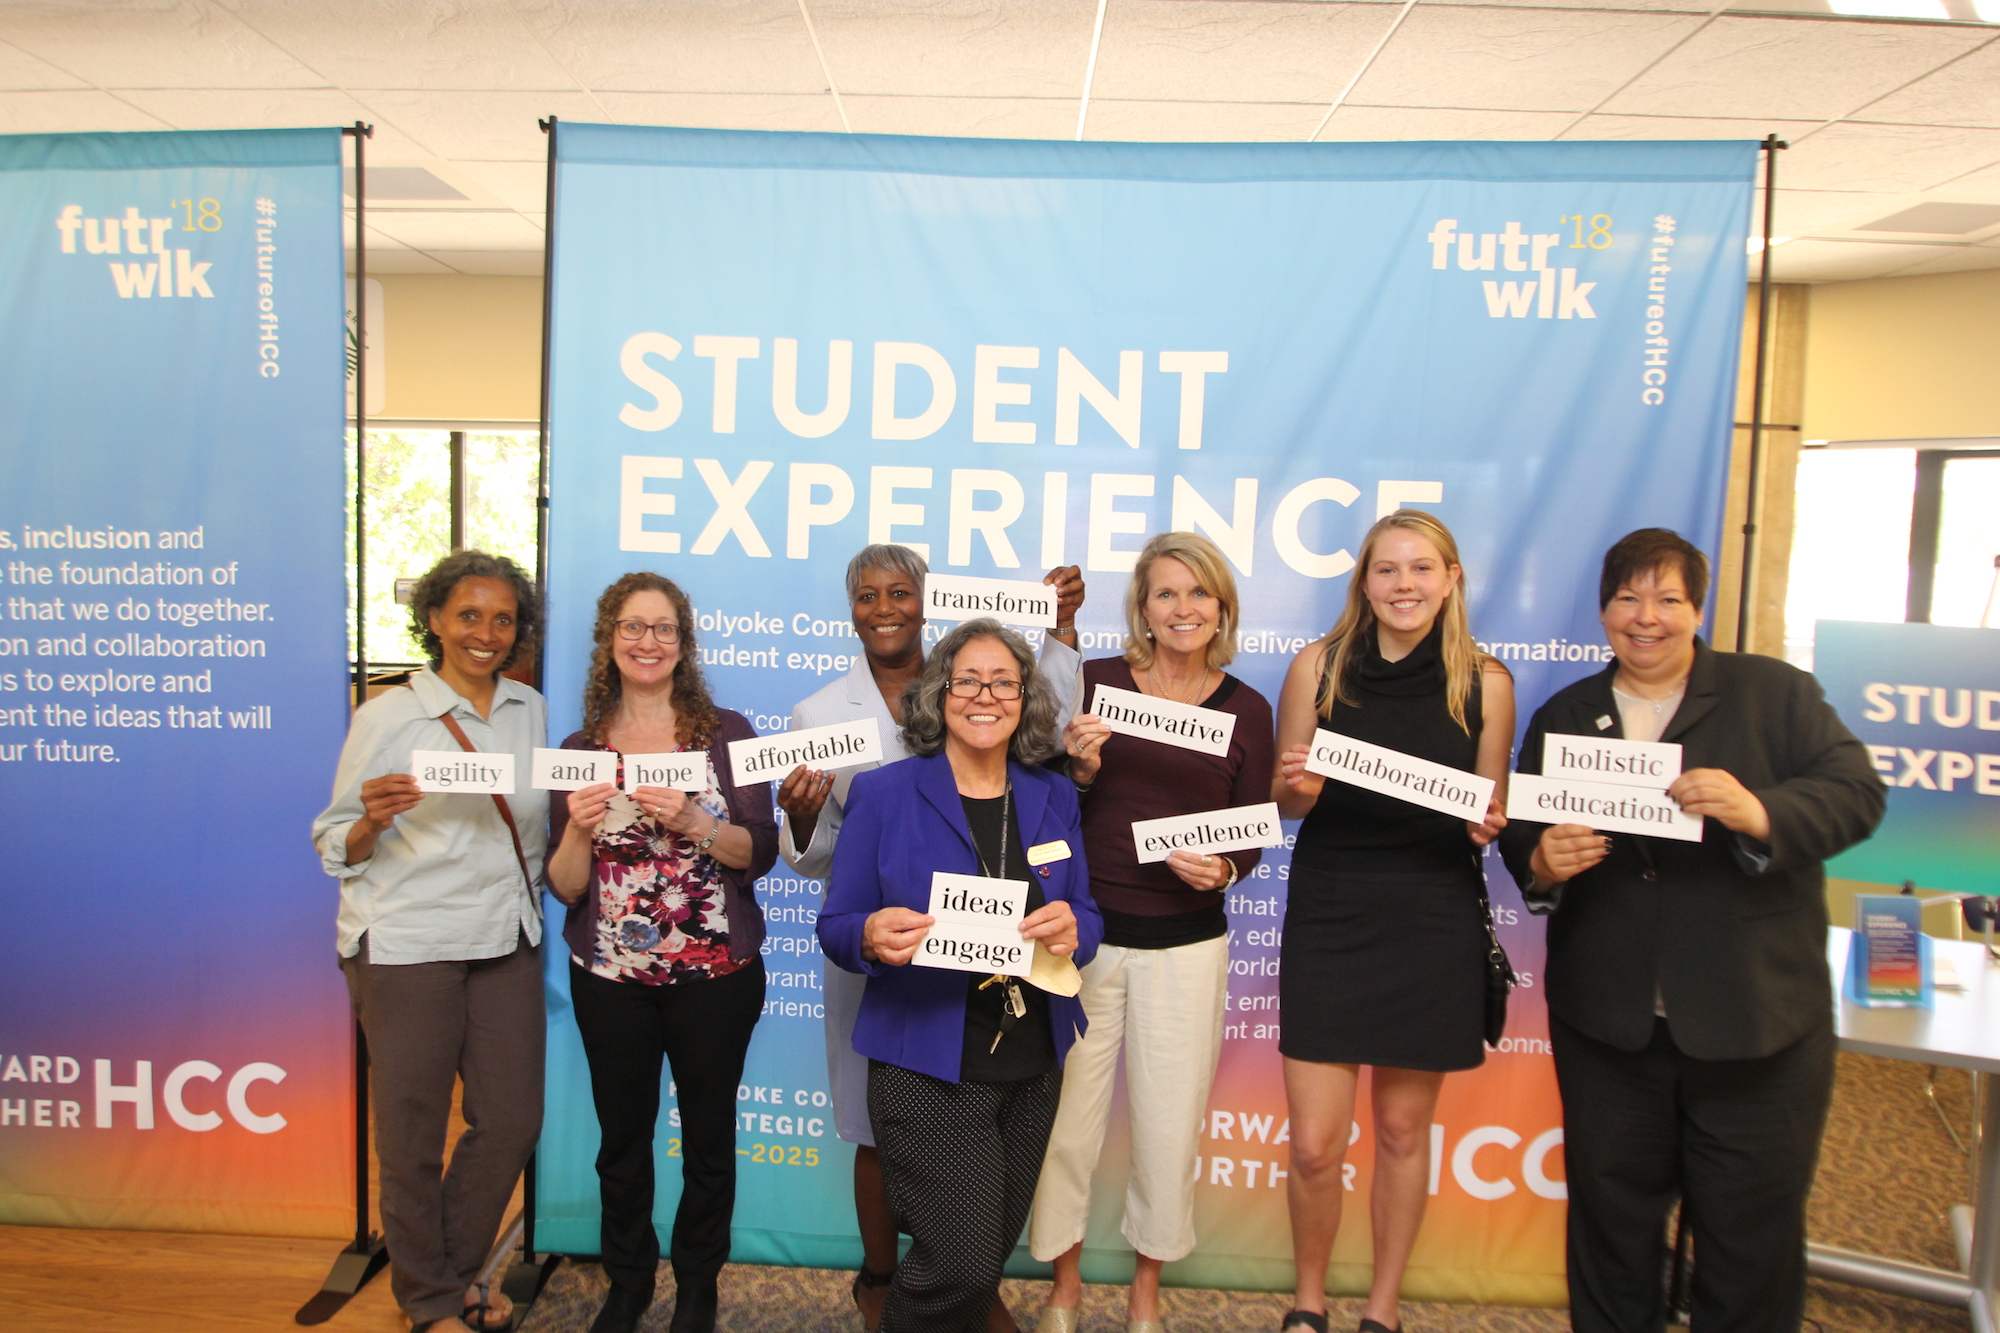 HCC President Christina Royal poses with community members at the Future Walk event. They are each holding an inspirational word printed on a large piece of paper. Words include "agility," "hope," "affordable," "innovative," and "collaboration."